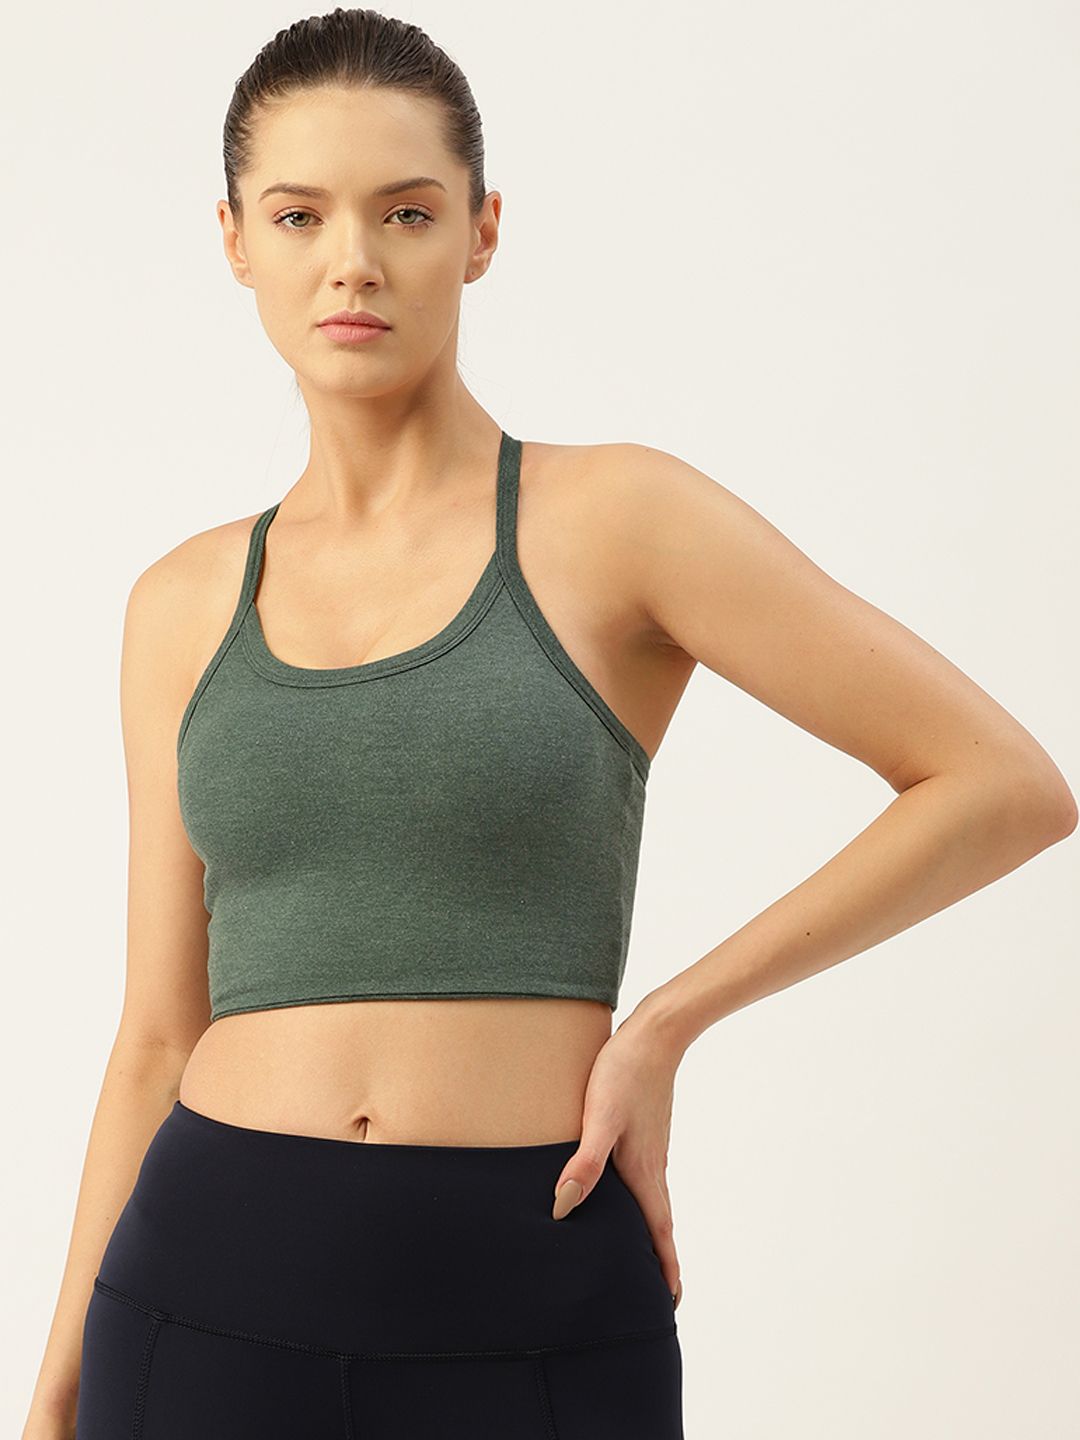 KICA Olive Green Solid High Support Workout Bra - Removable Padding Price in India